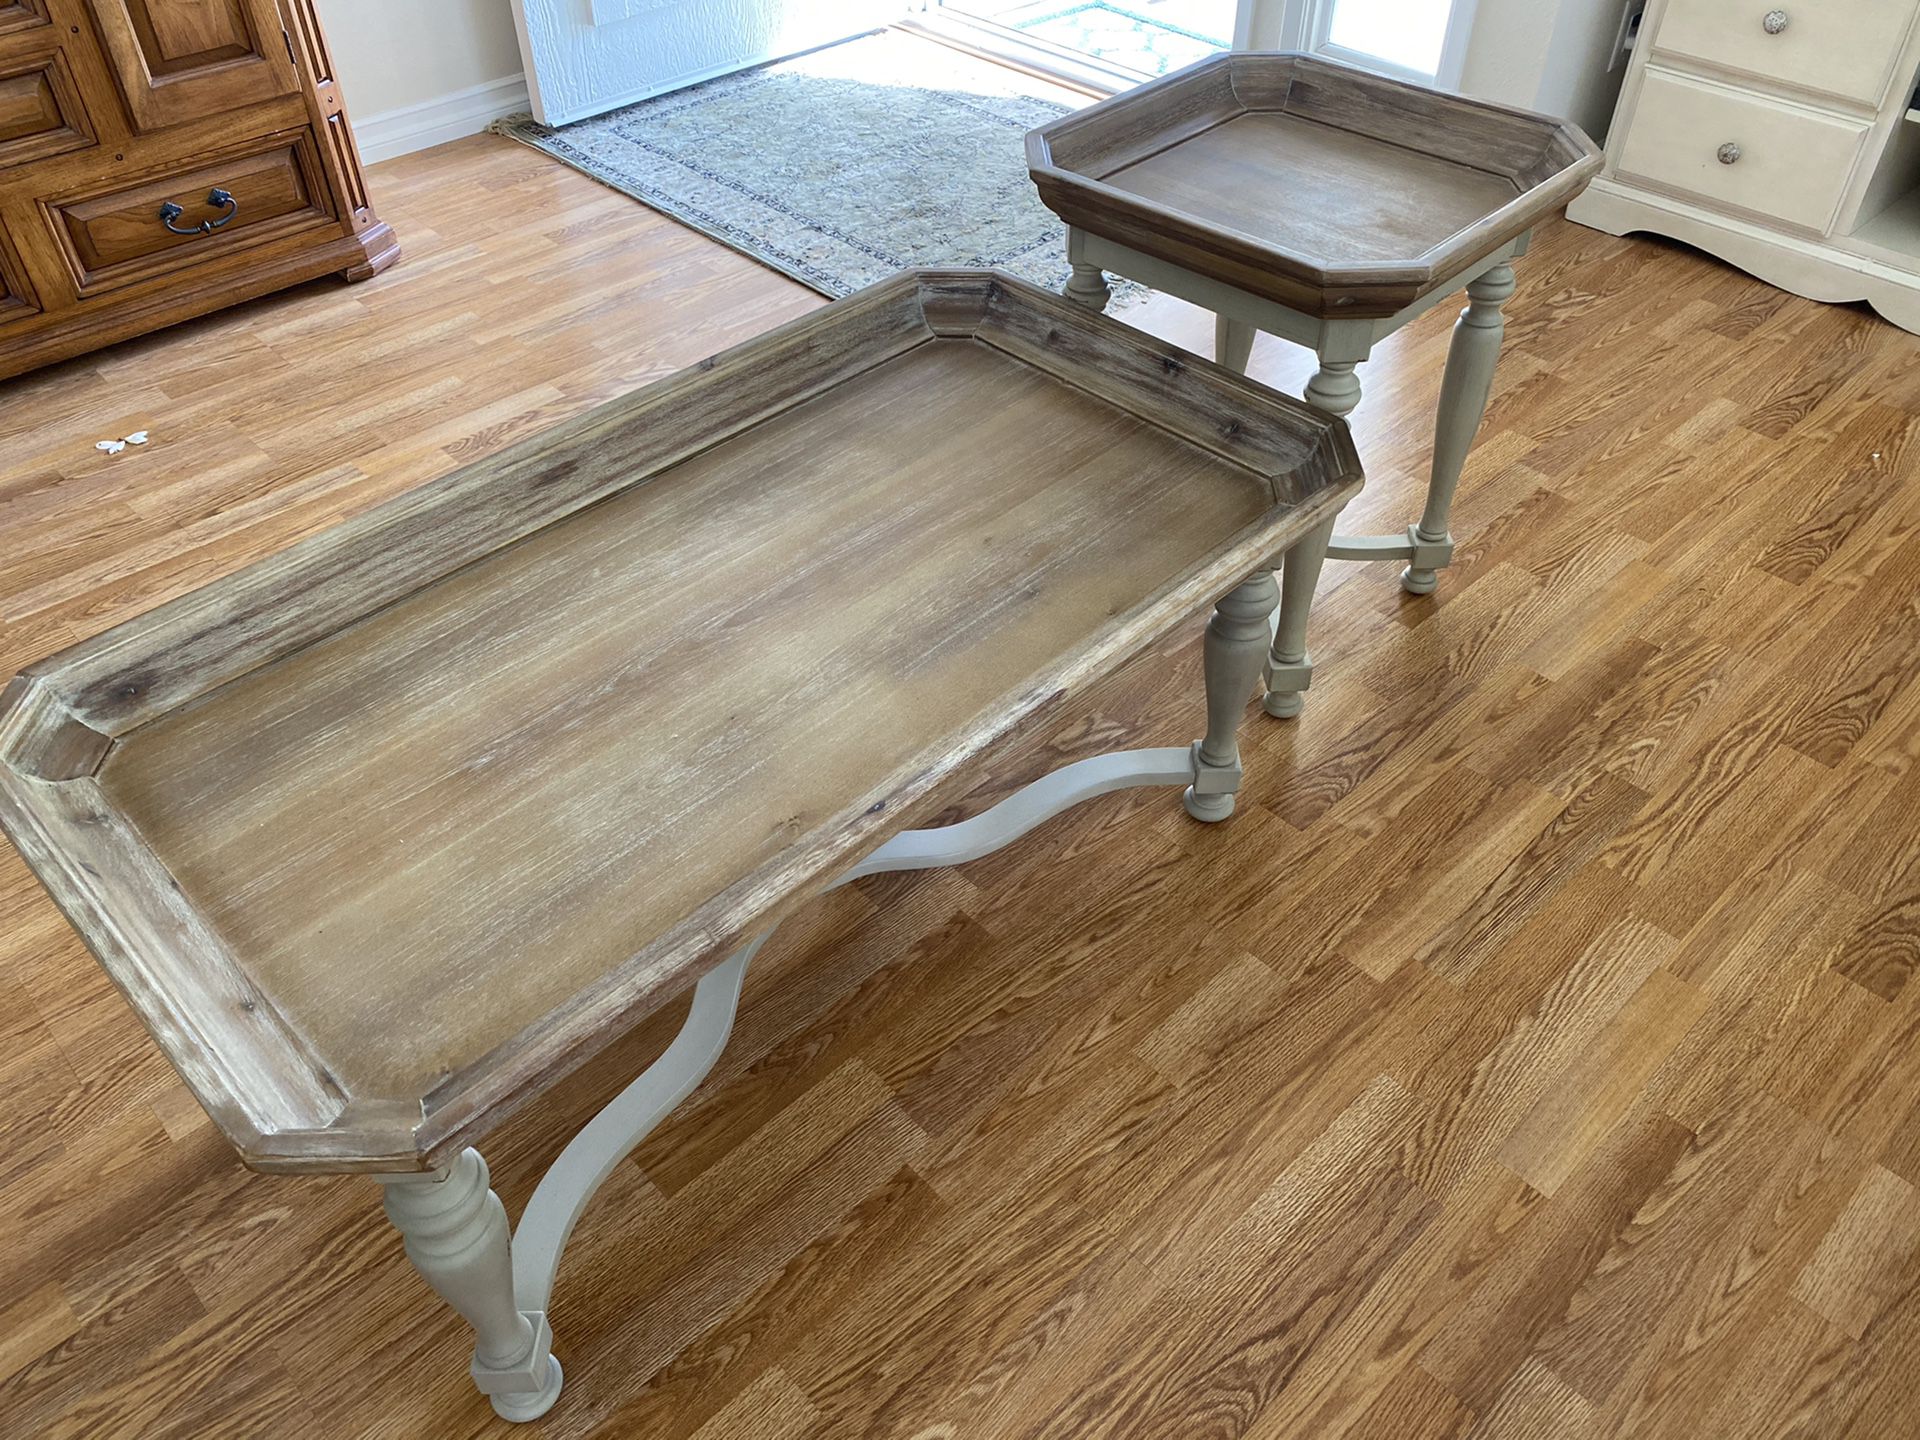 Pier one coffee table/side table